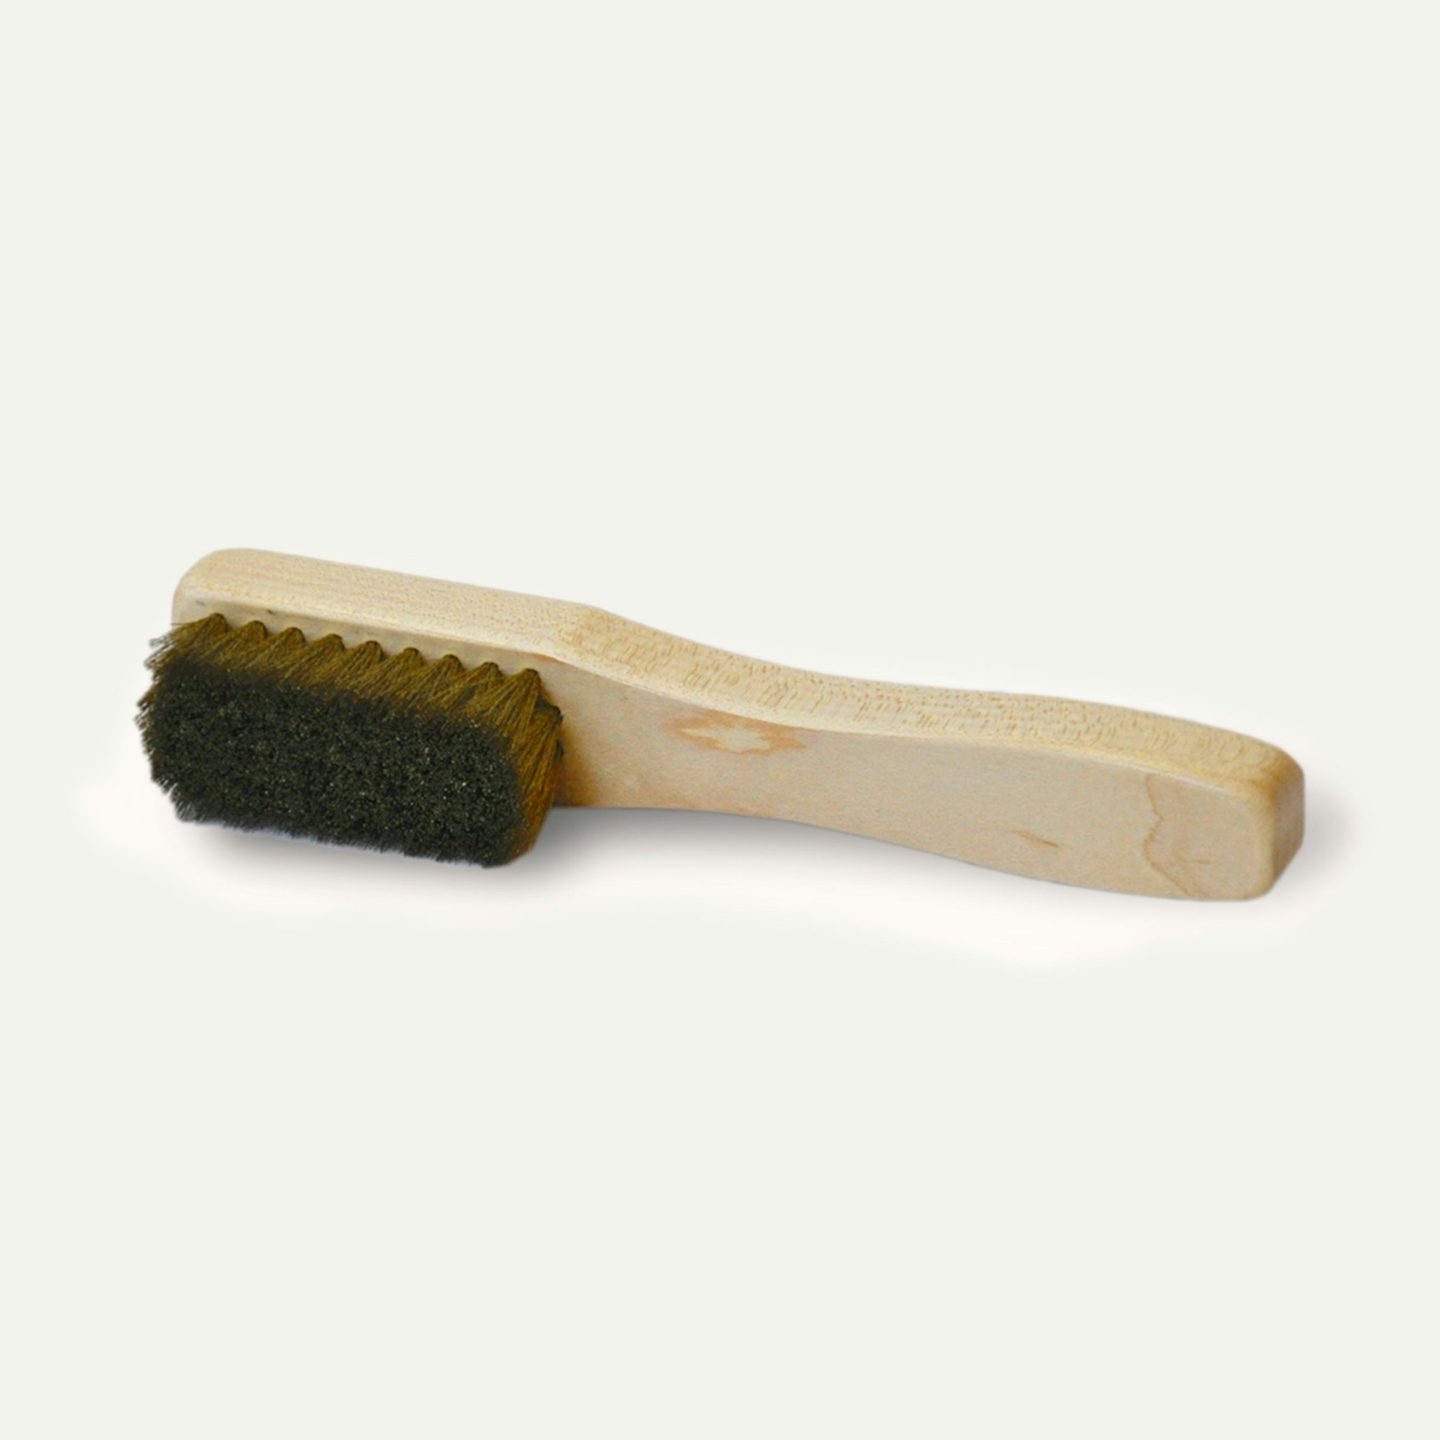 American Maple Suede Brush - Tufted Brass Bristles - Made in USA